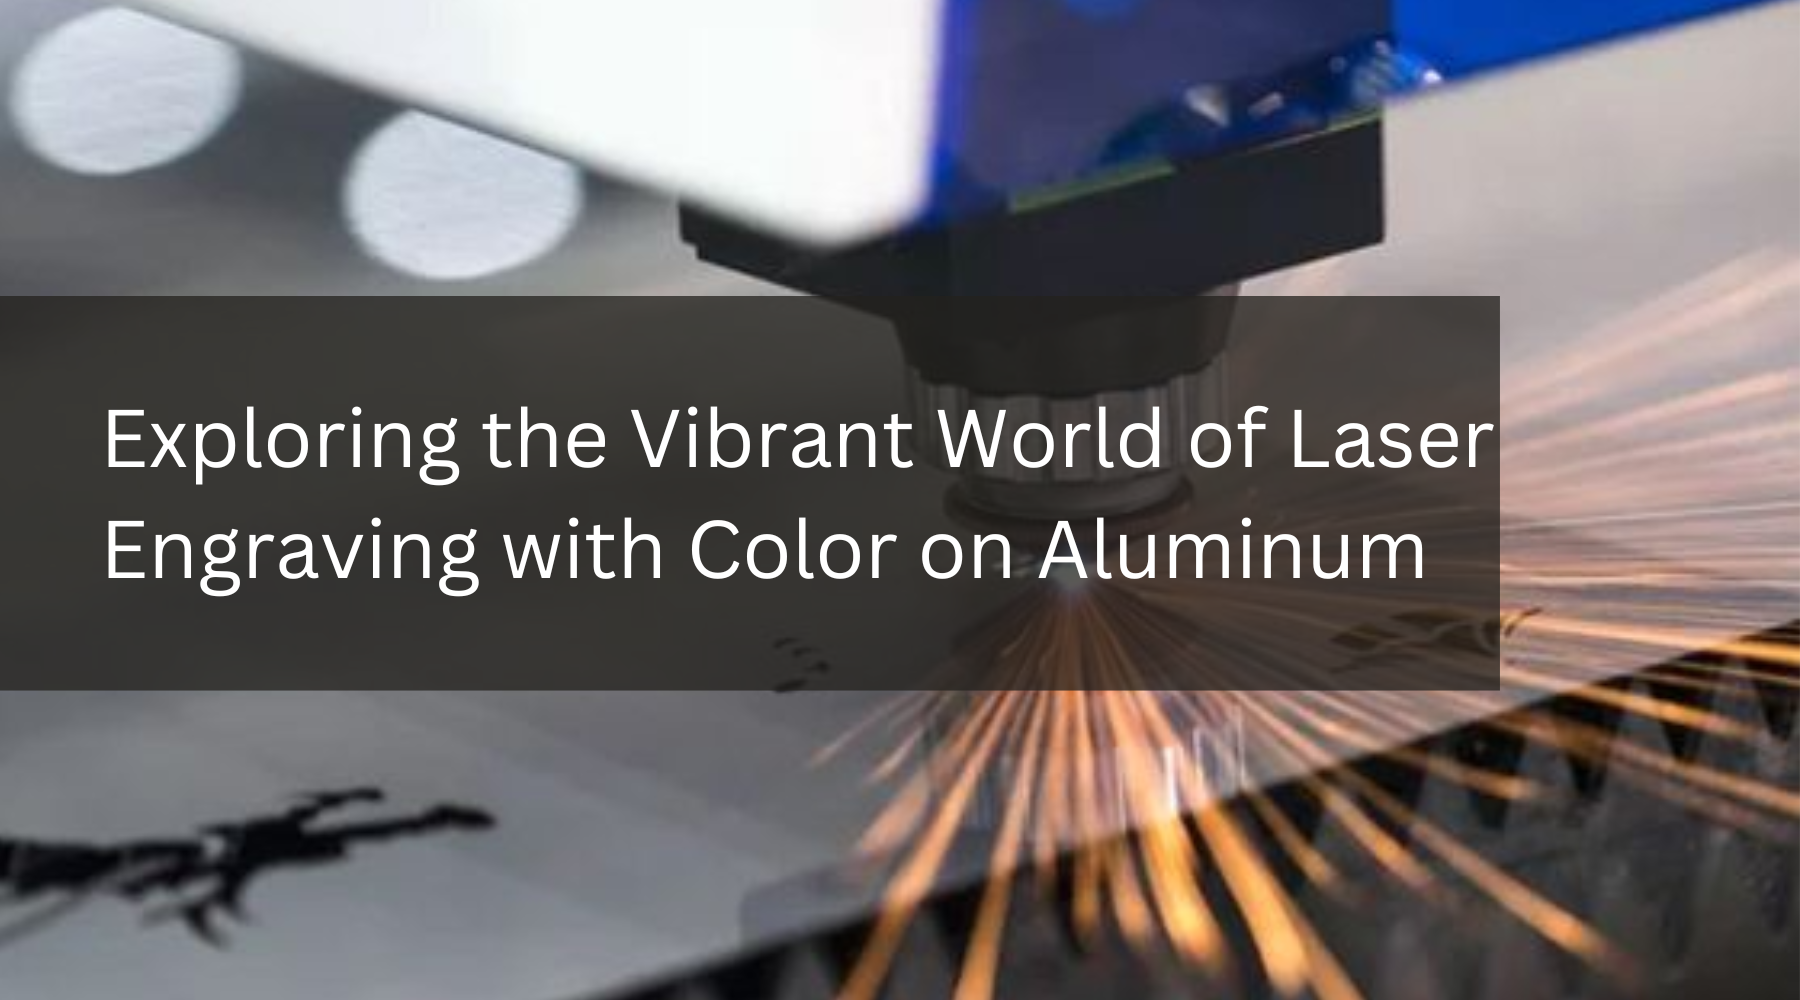 Exploring the Vibrant World of Laser Engraving with Color on Aluminum